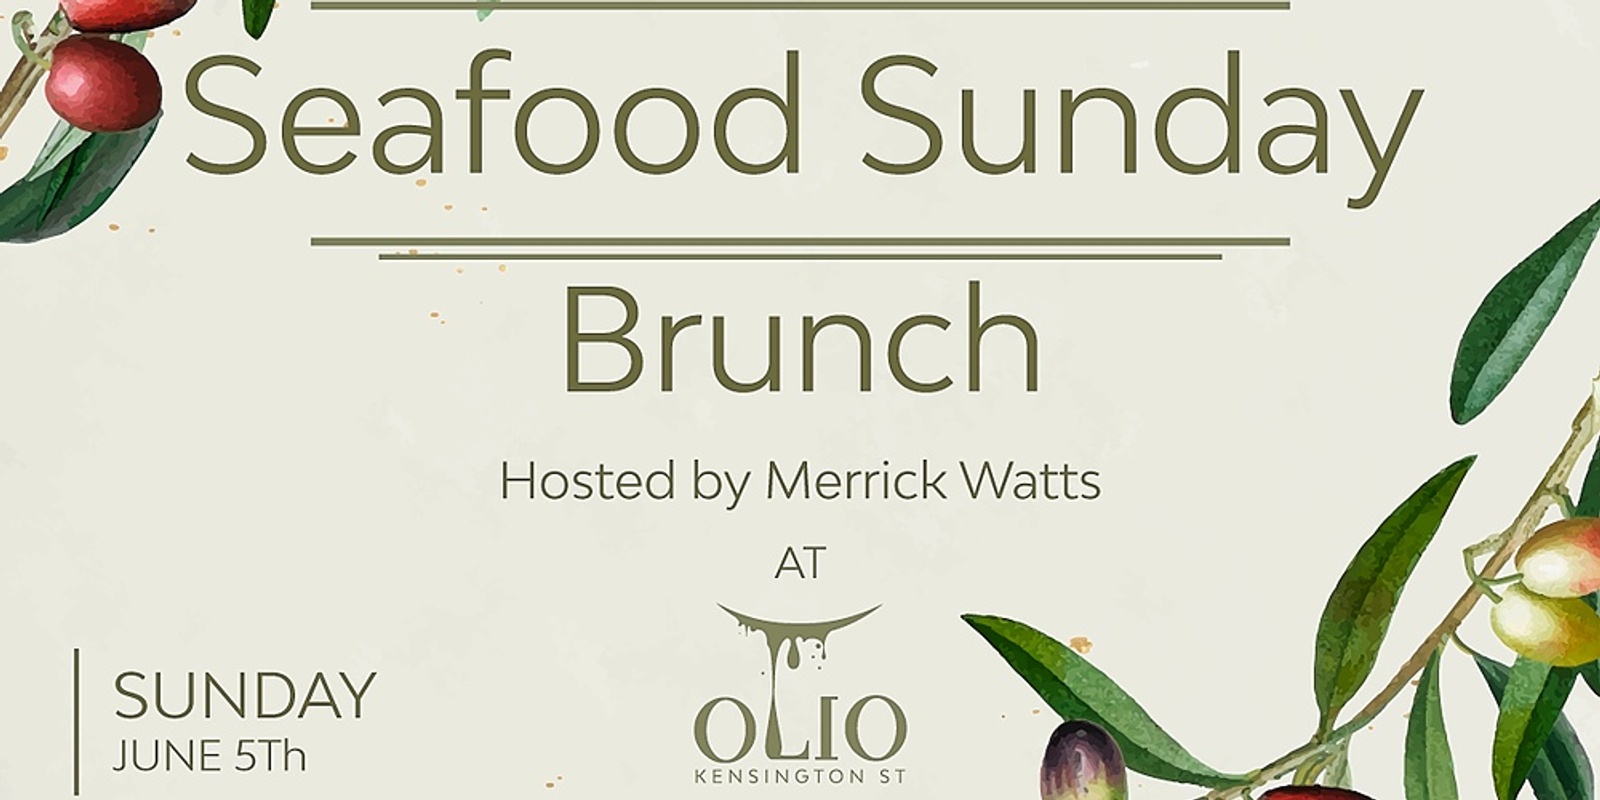 Banner image for Olio’s Sunday Seafood Brunch Featuring Merrick Watts